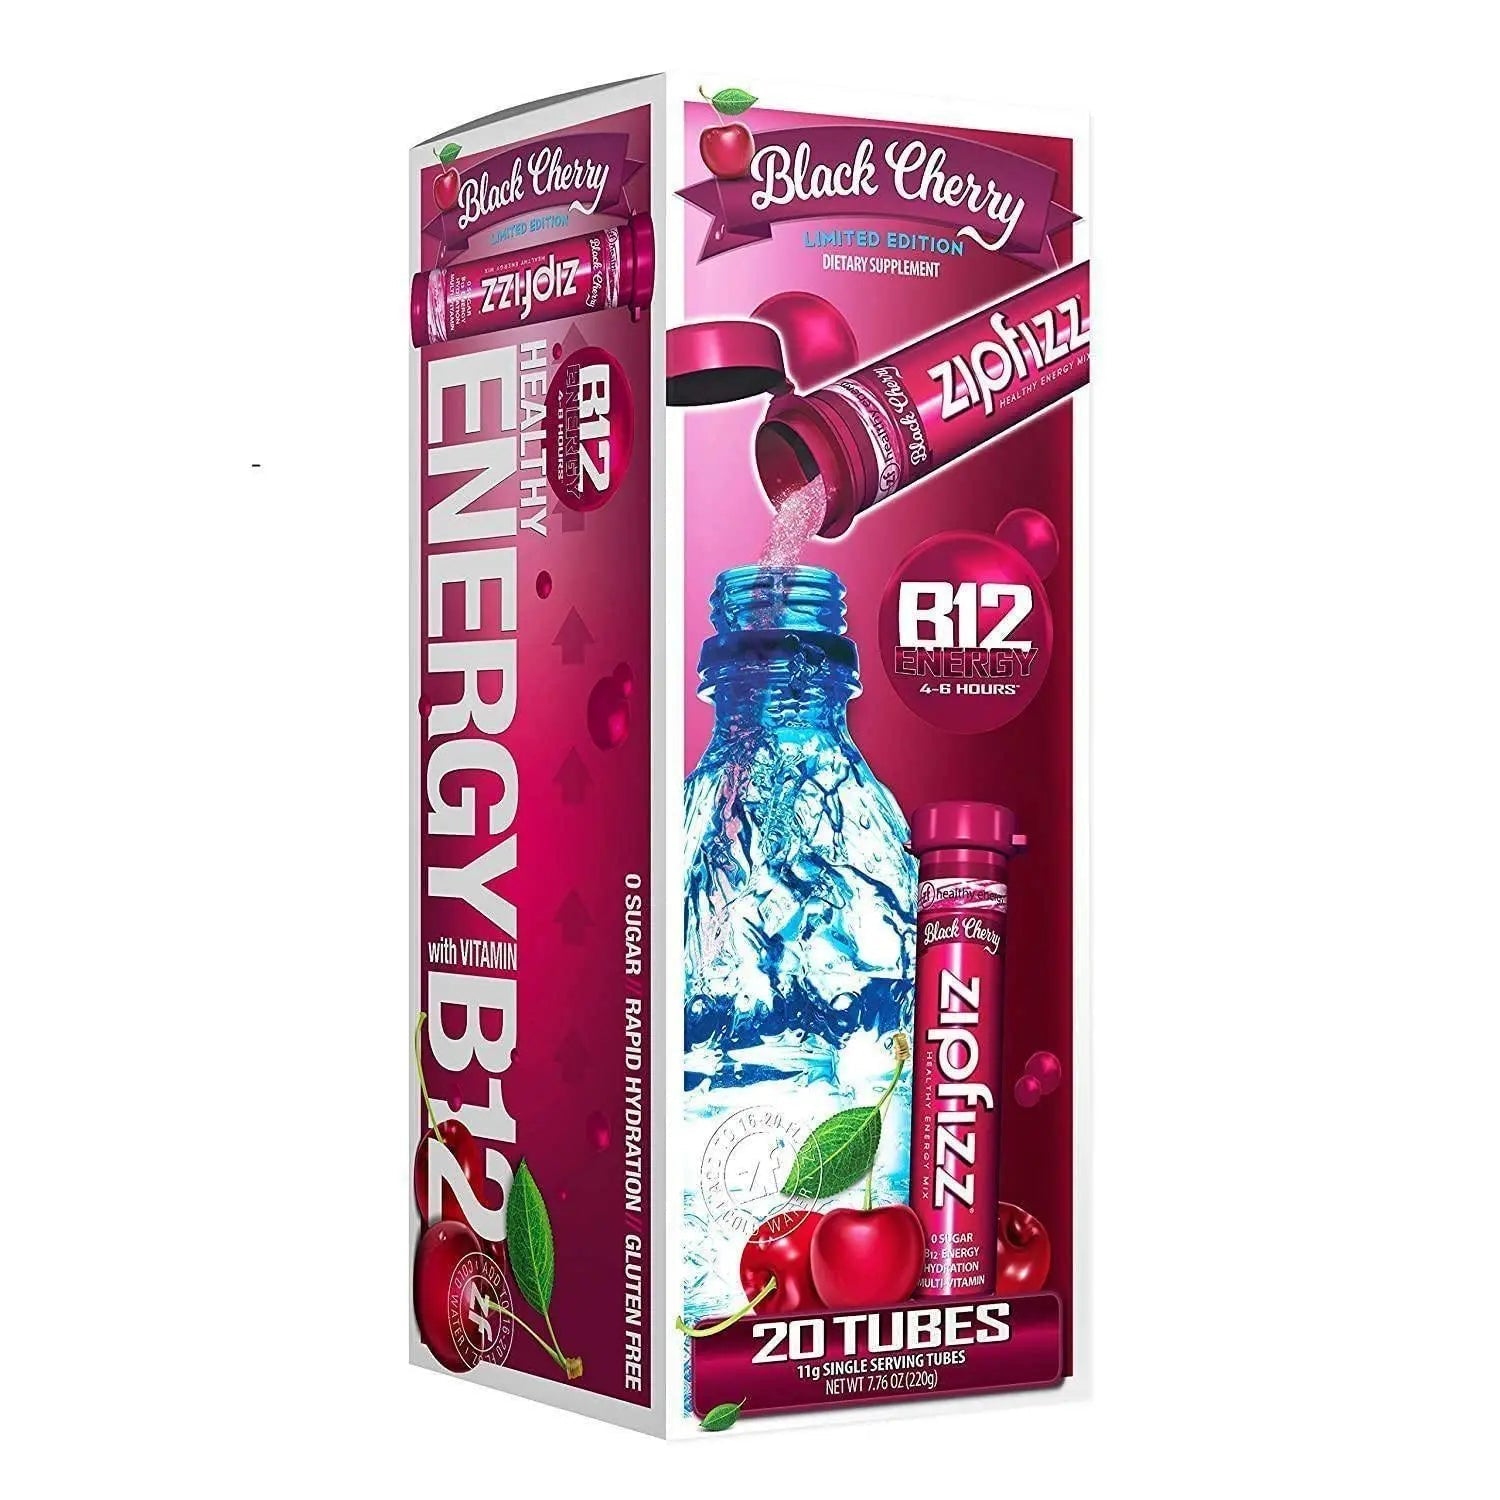 Wholesale prices with free shipping all over United States Zipfizz Energy Drink Mix, Black Cherry (20 ct.) - Steven Deals